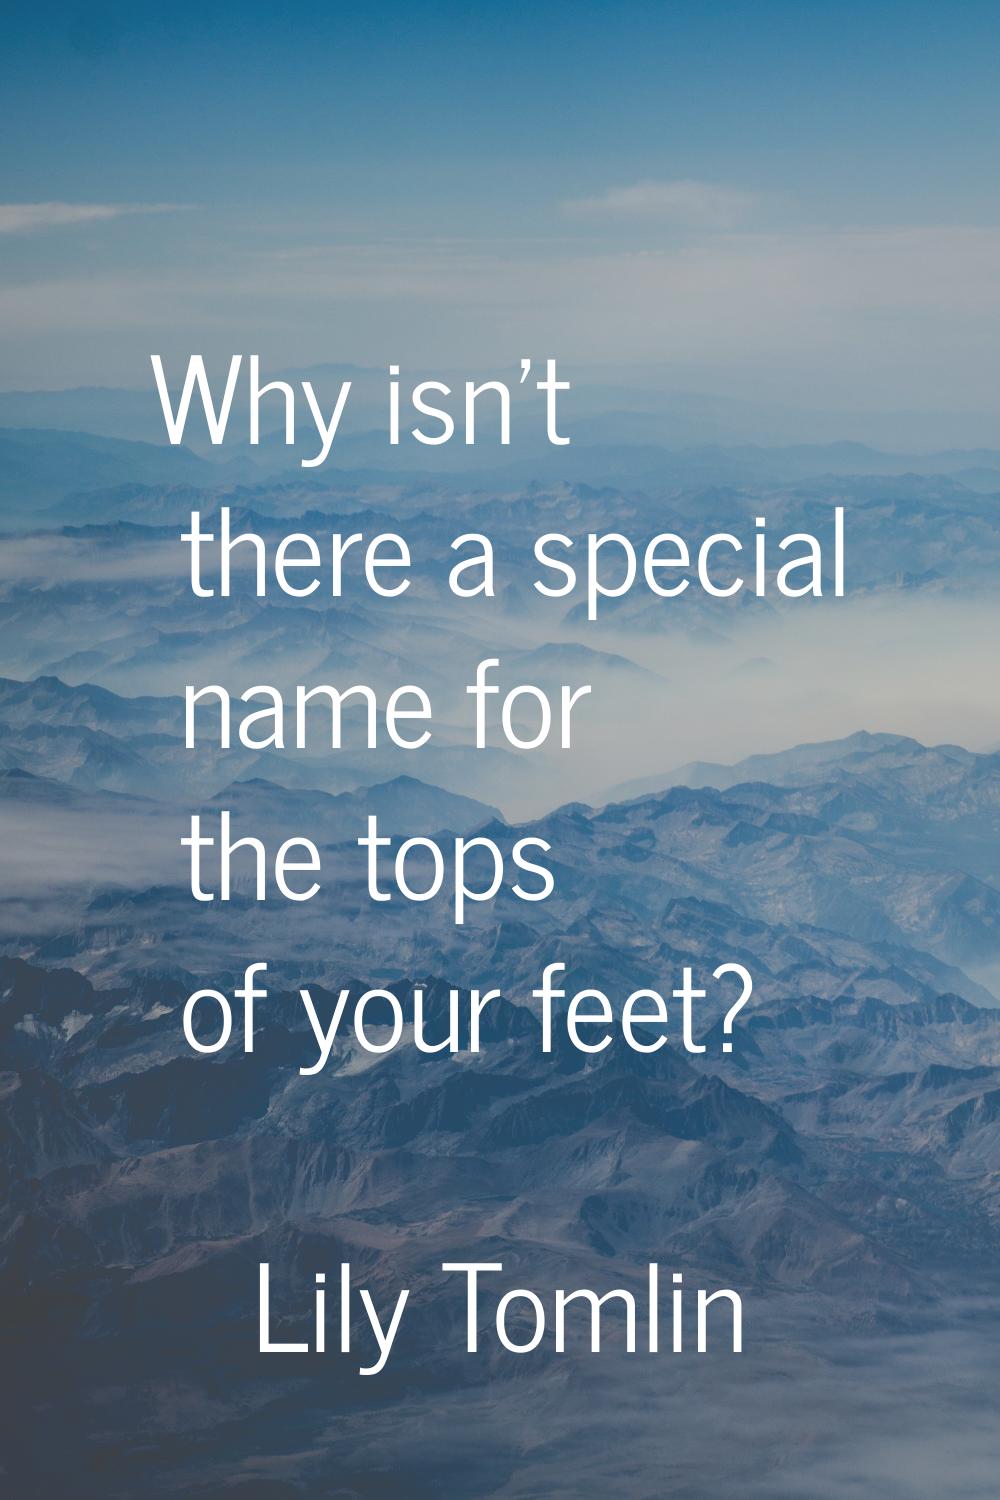 Why isn't there a special name for the tops of your feet?